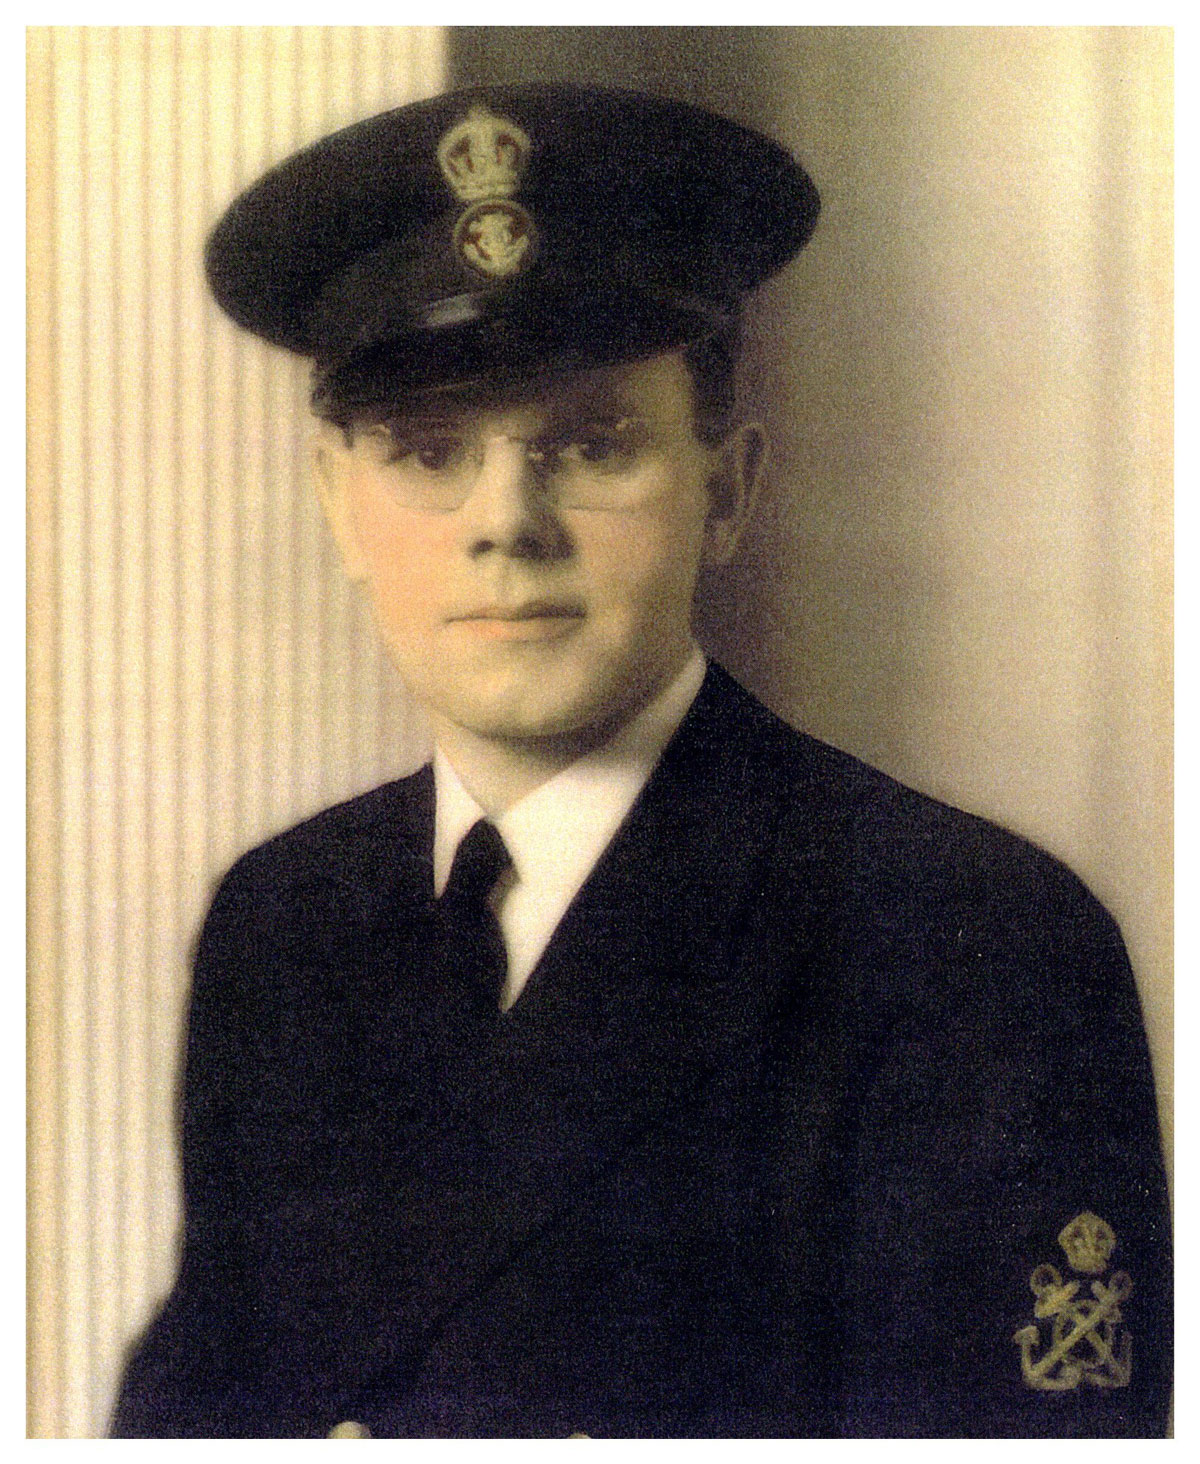 Chief Petty Officer Charles Robertson, Royal Canadian Navy Volunteer Reserve